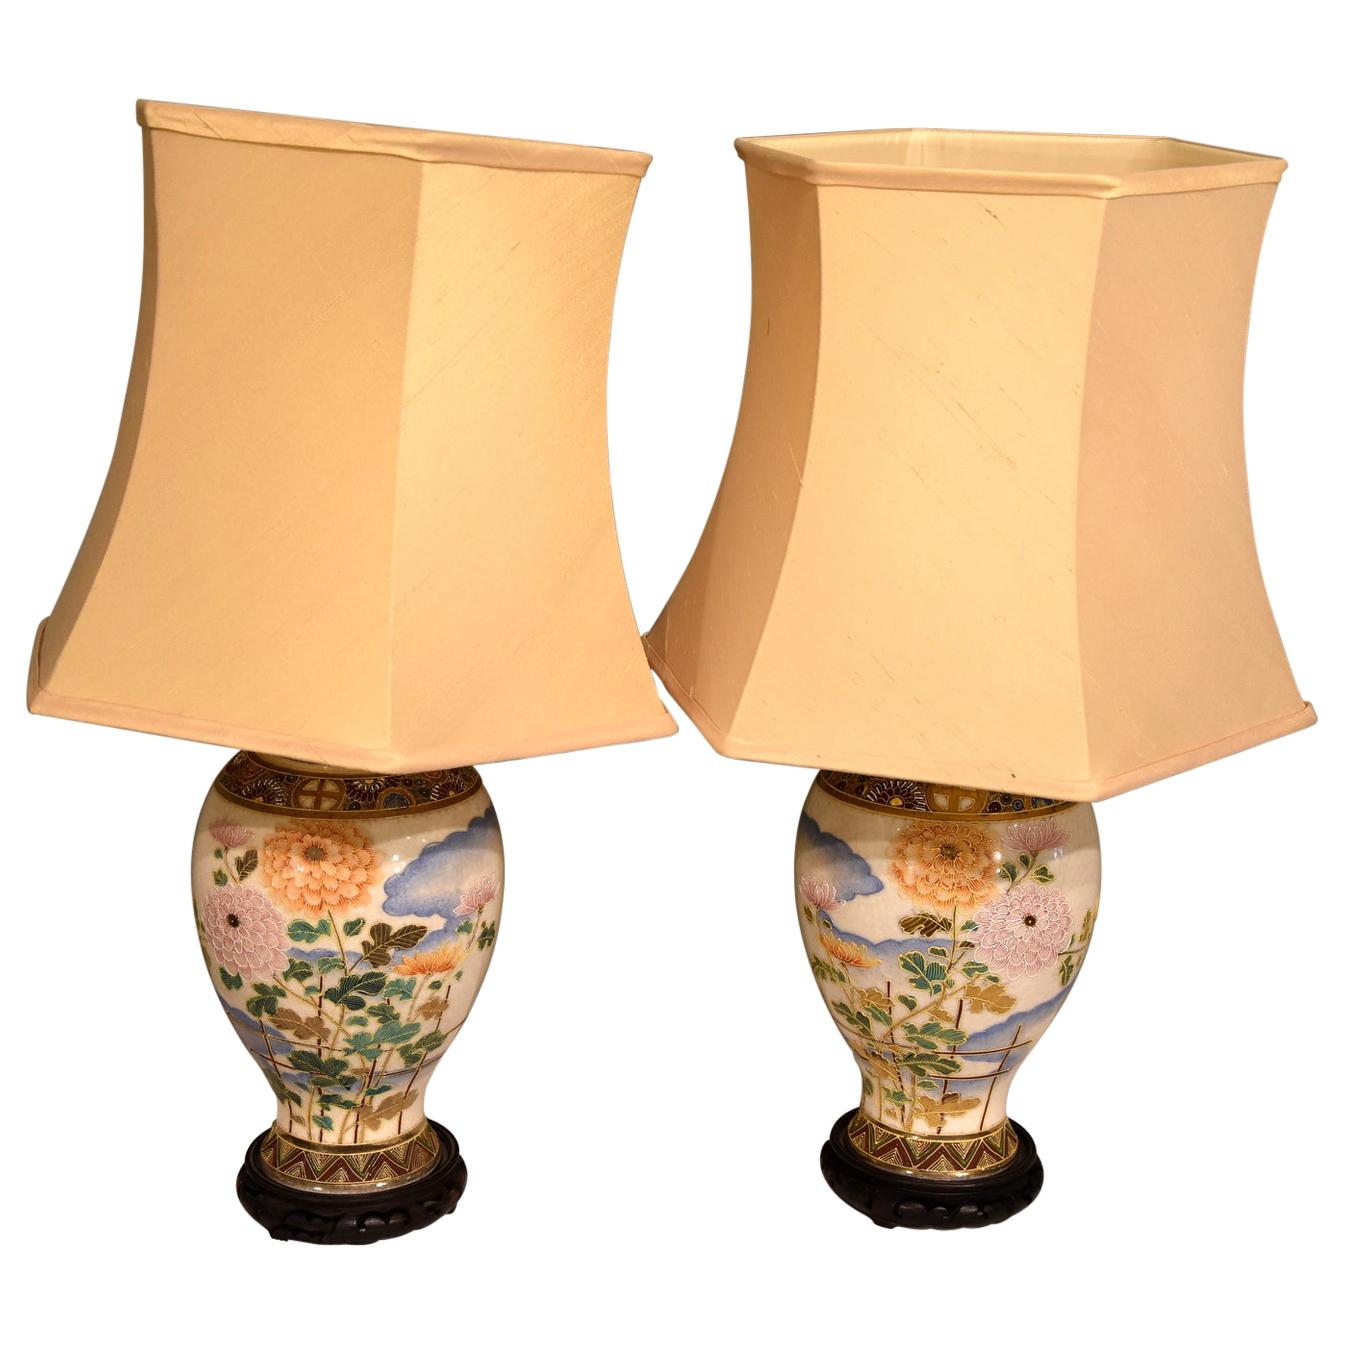 Pair of Satsuma Japanese Vases Converted to Lamps